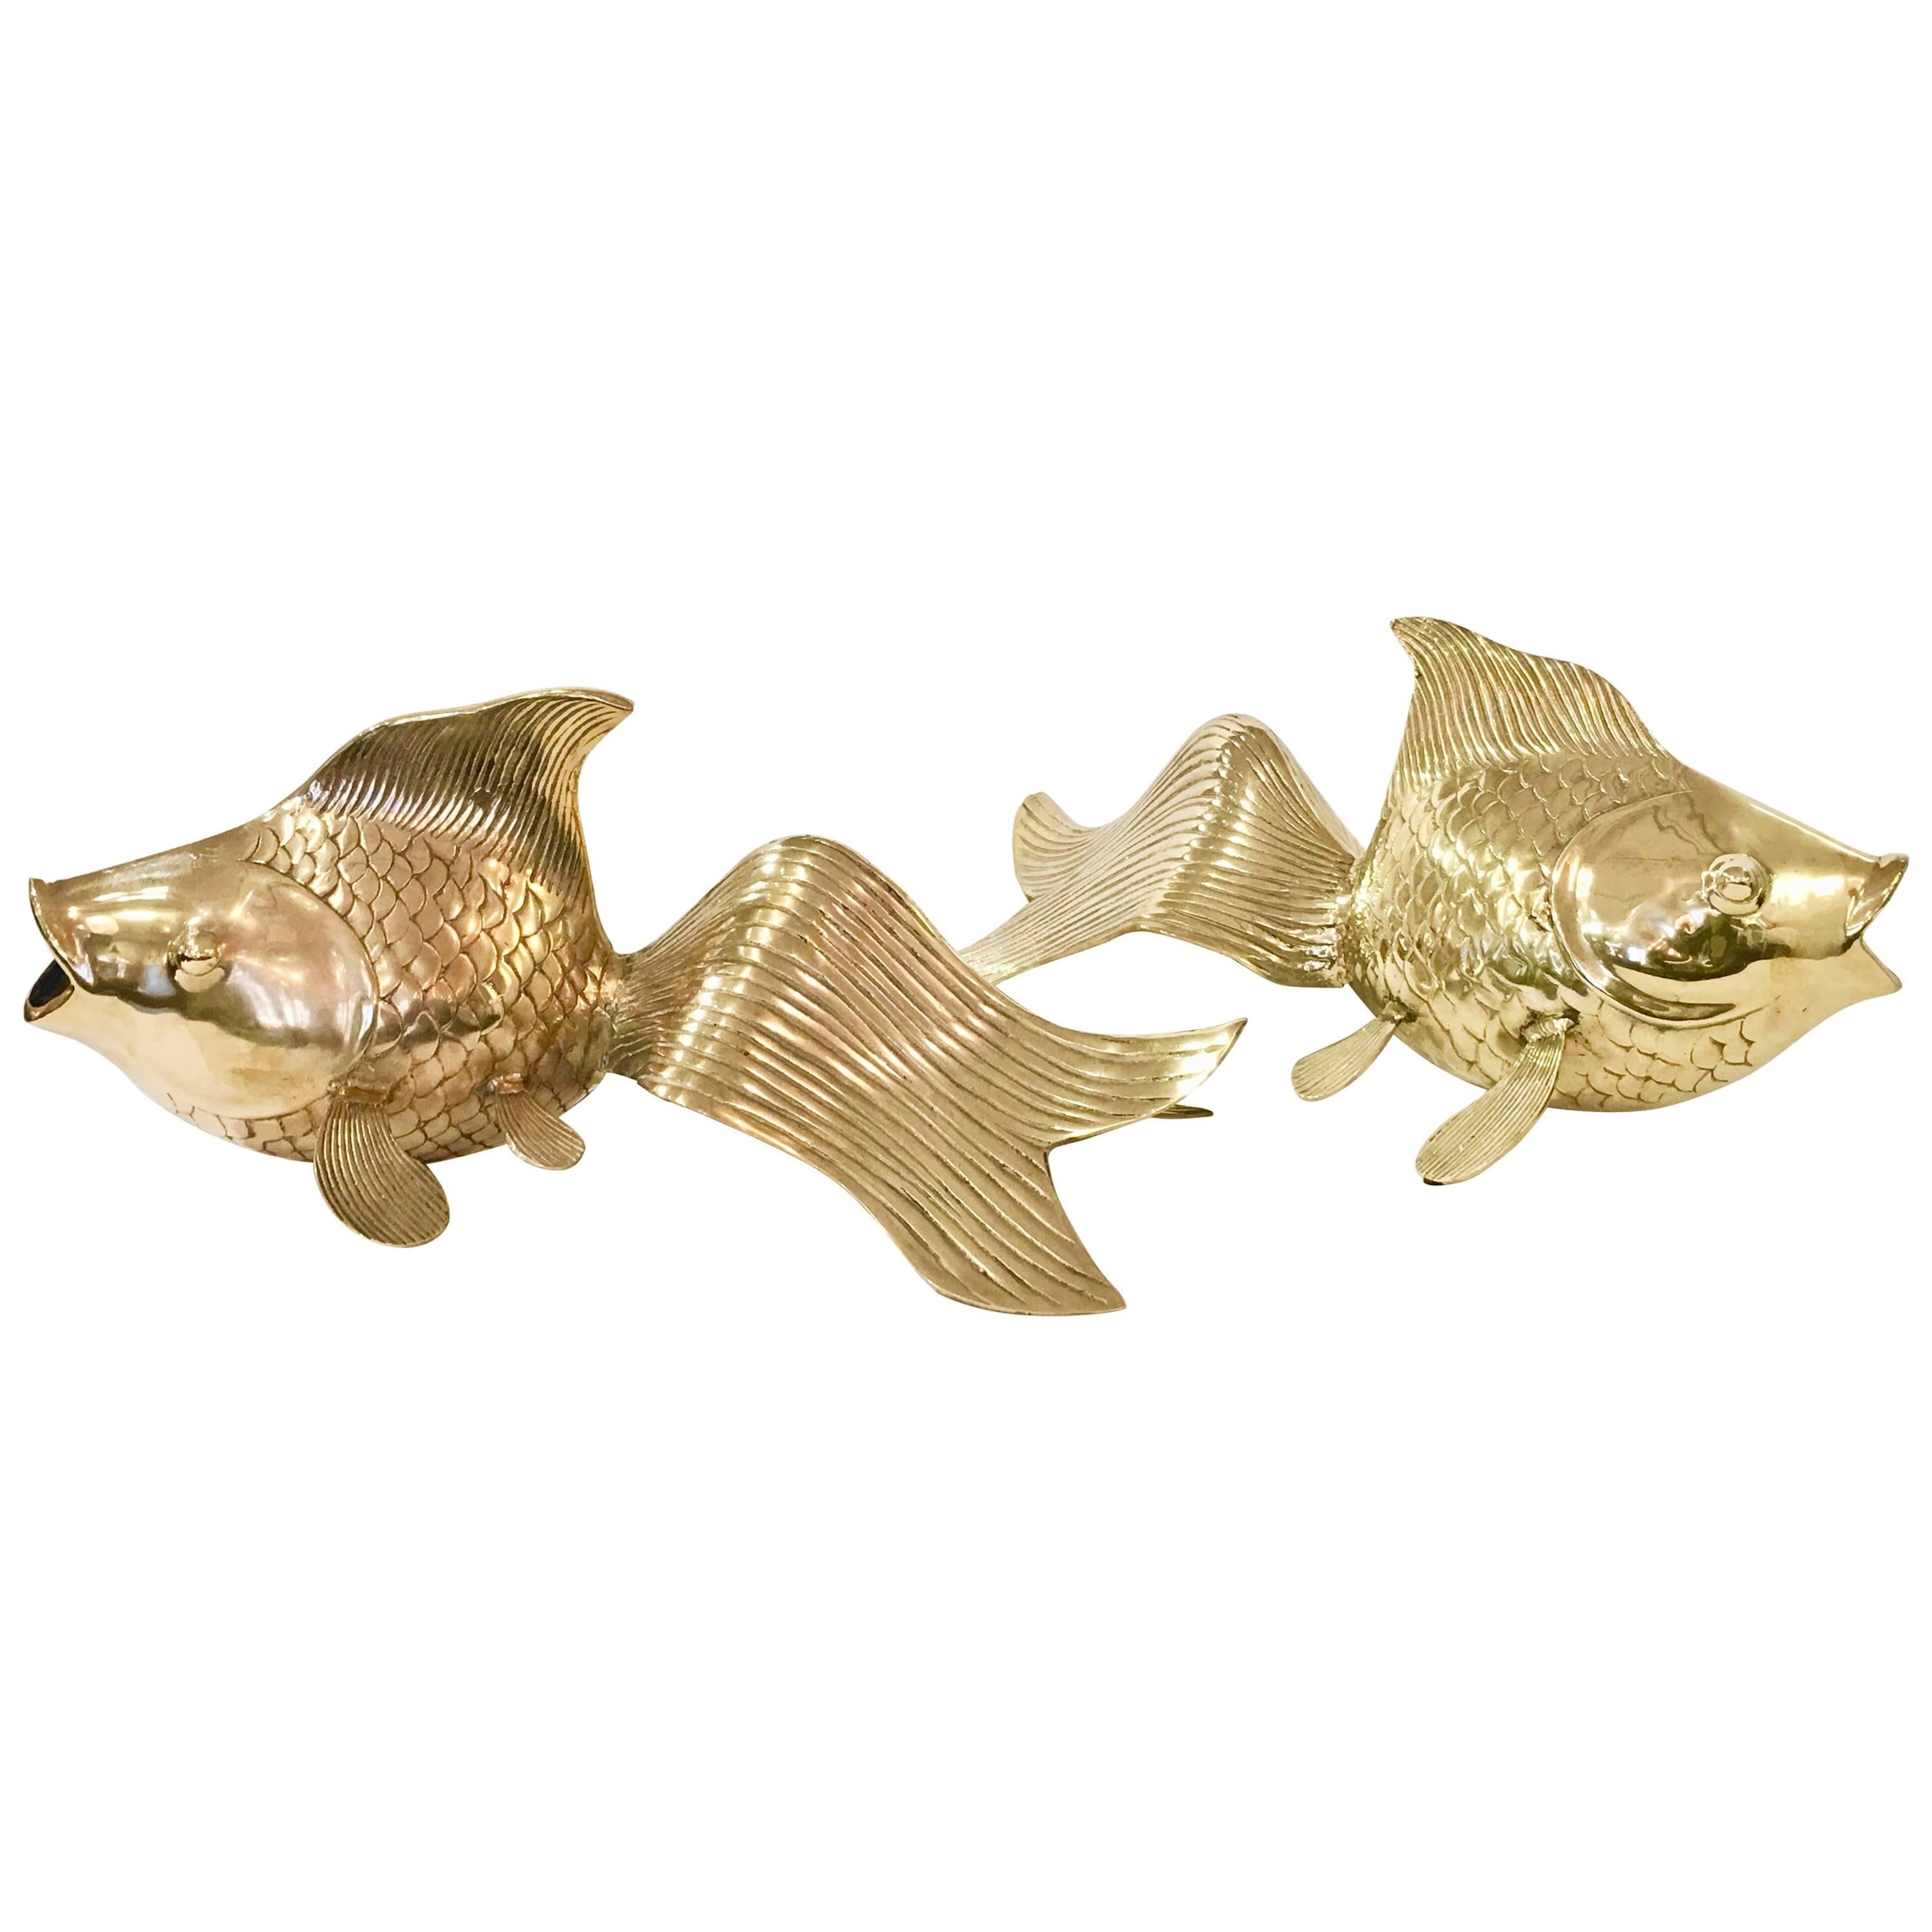 Pair of Monumental Koi Fish in Brass by Rosenthal